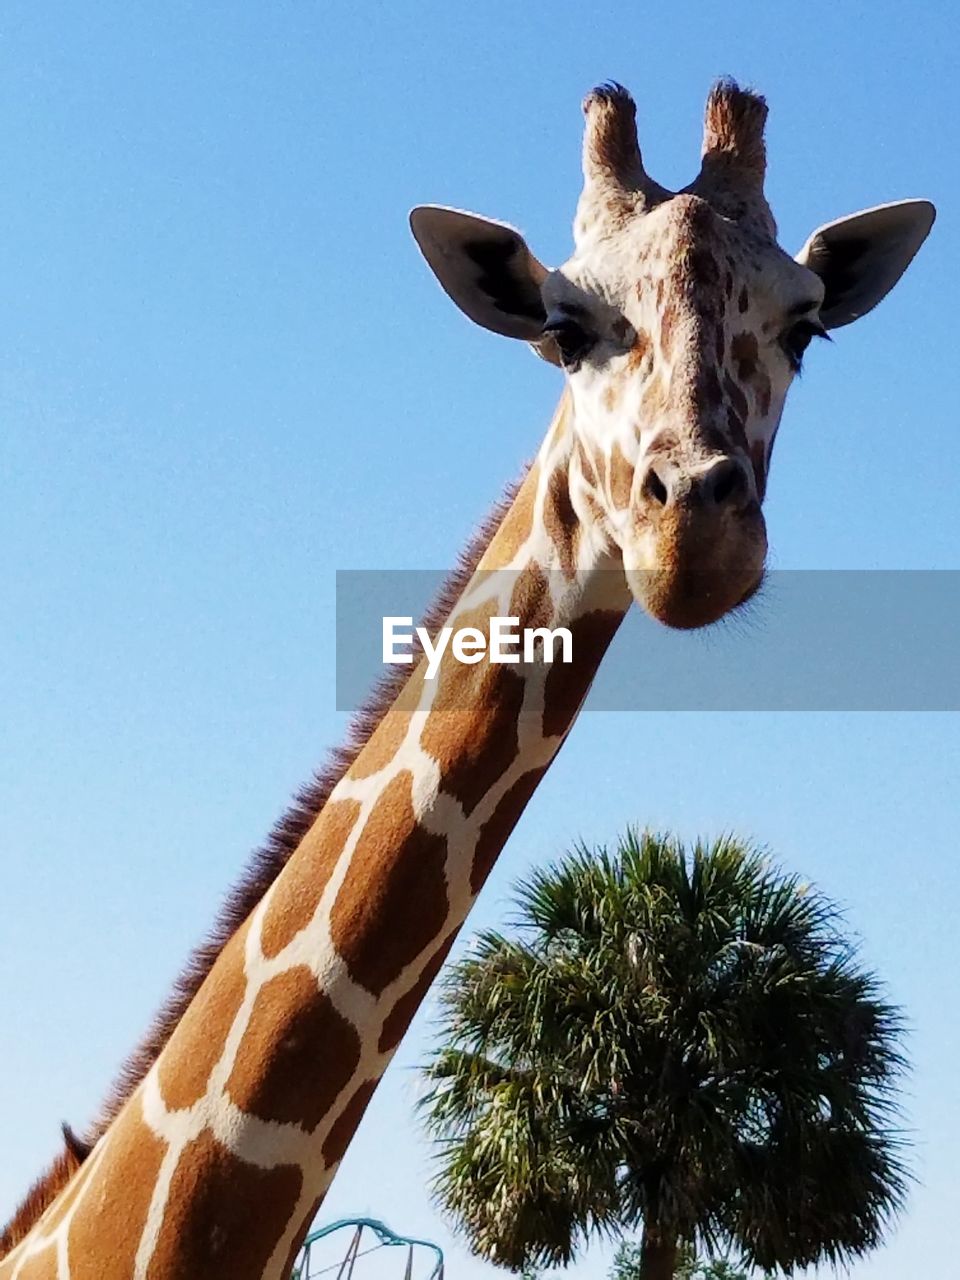 LOW ANGLE VIEW OF GIRAFFE AGAINST CLEAR SKY